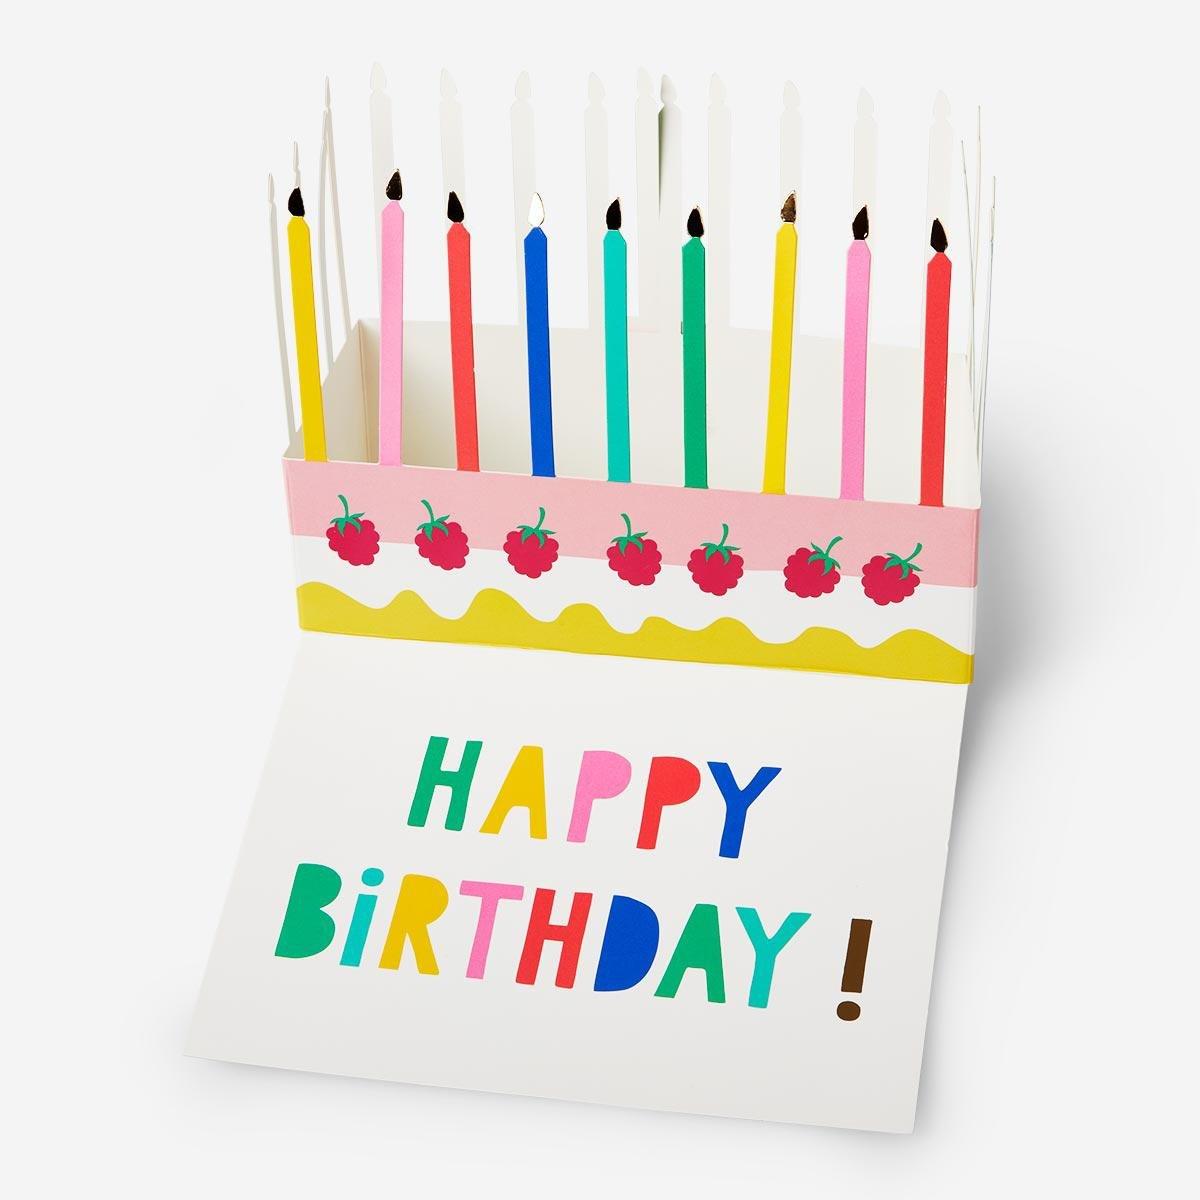 Foldout birthday card with envelope